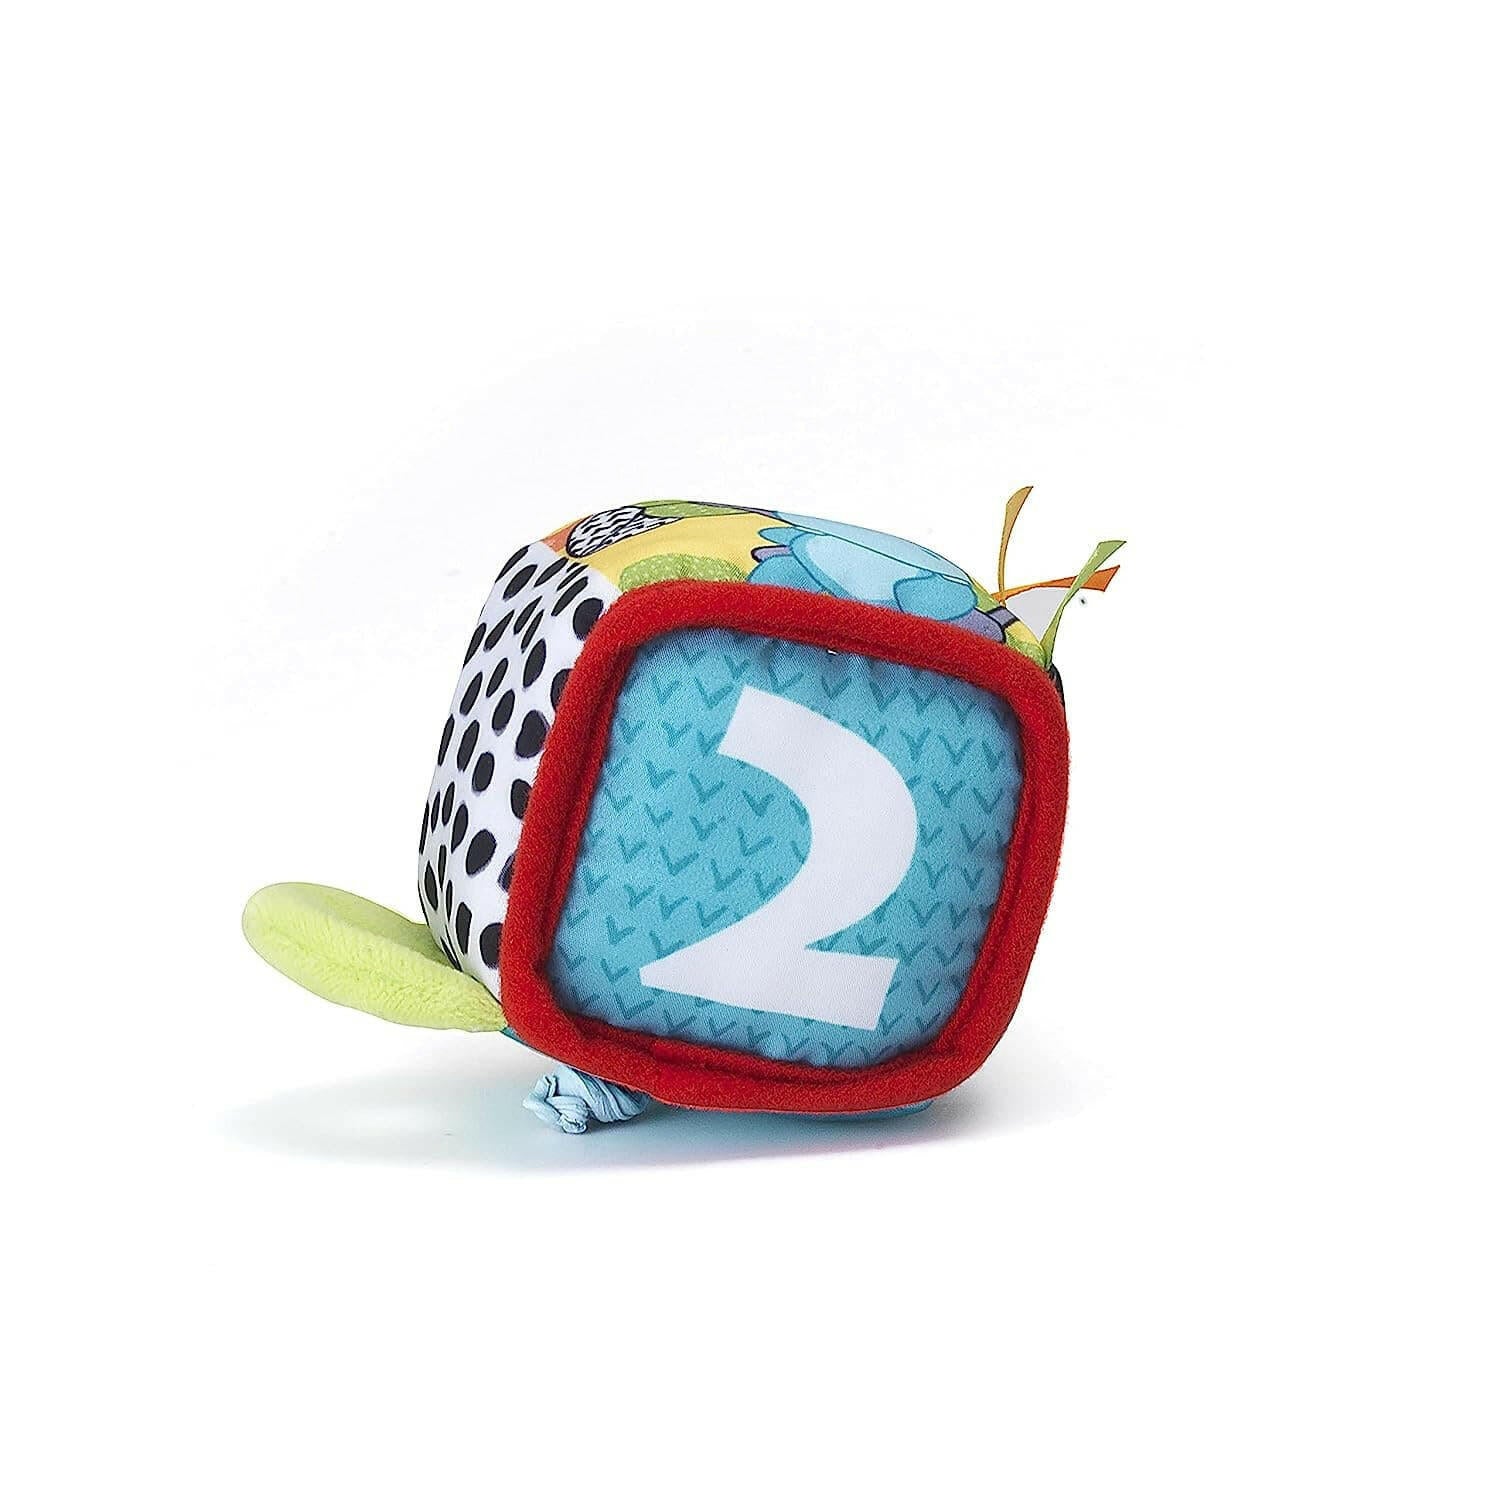 Infantino Discover and Play Soft Blocks Development Toy.